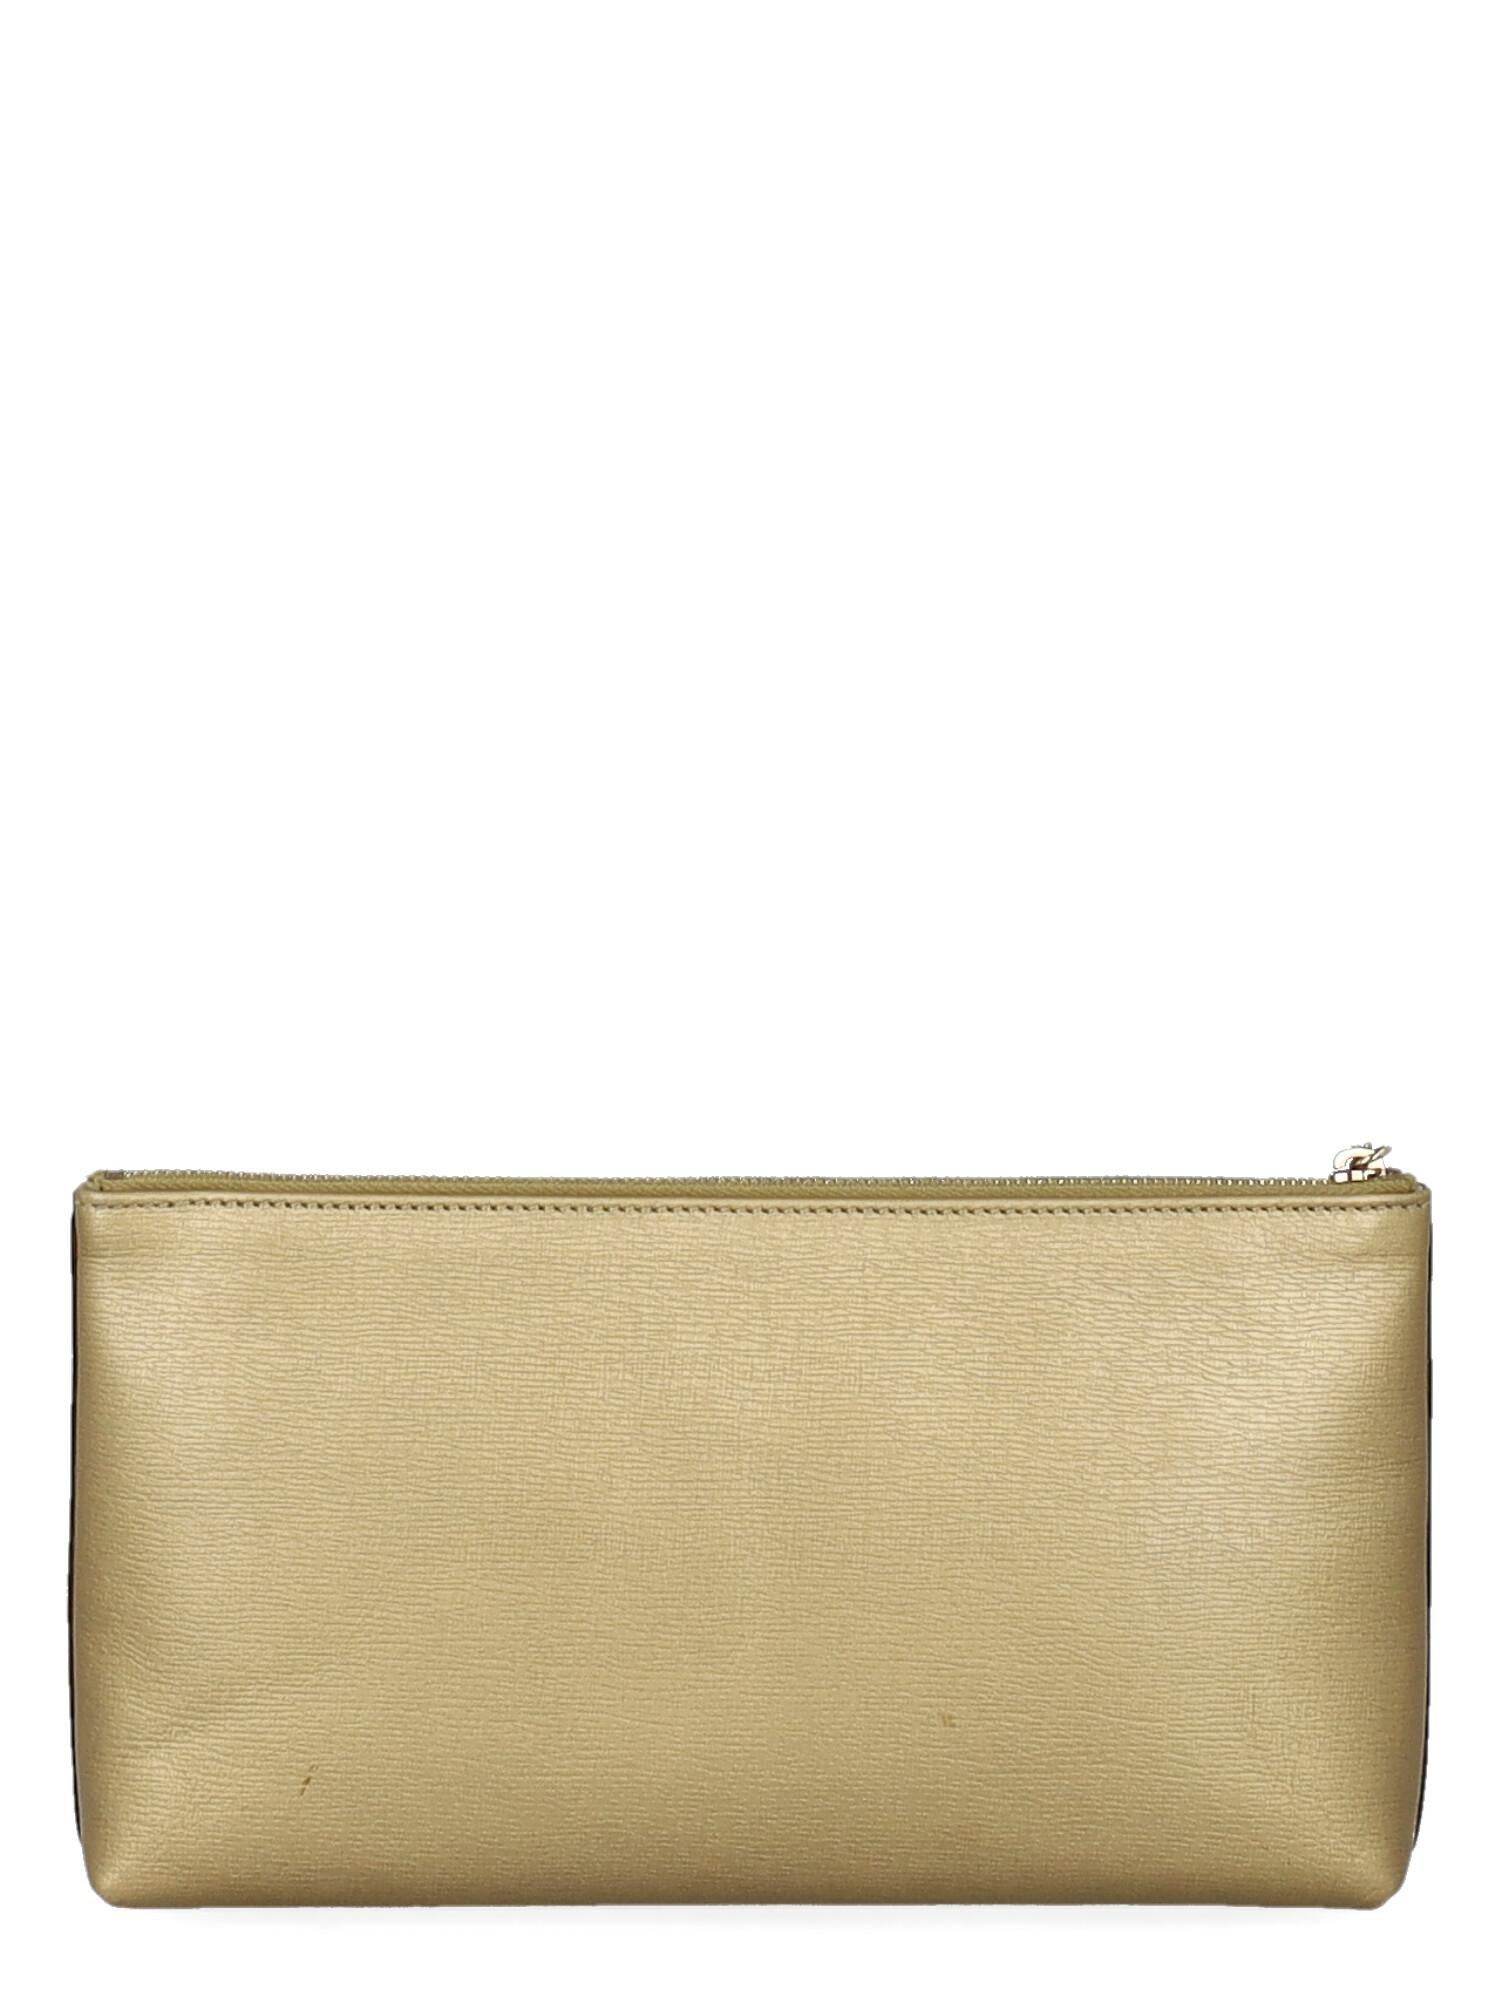 Women's Gucci  Women   Handbags  Bamboo Gold Leather  For Sale